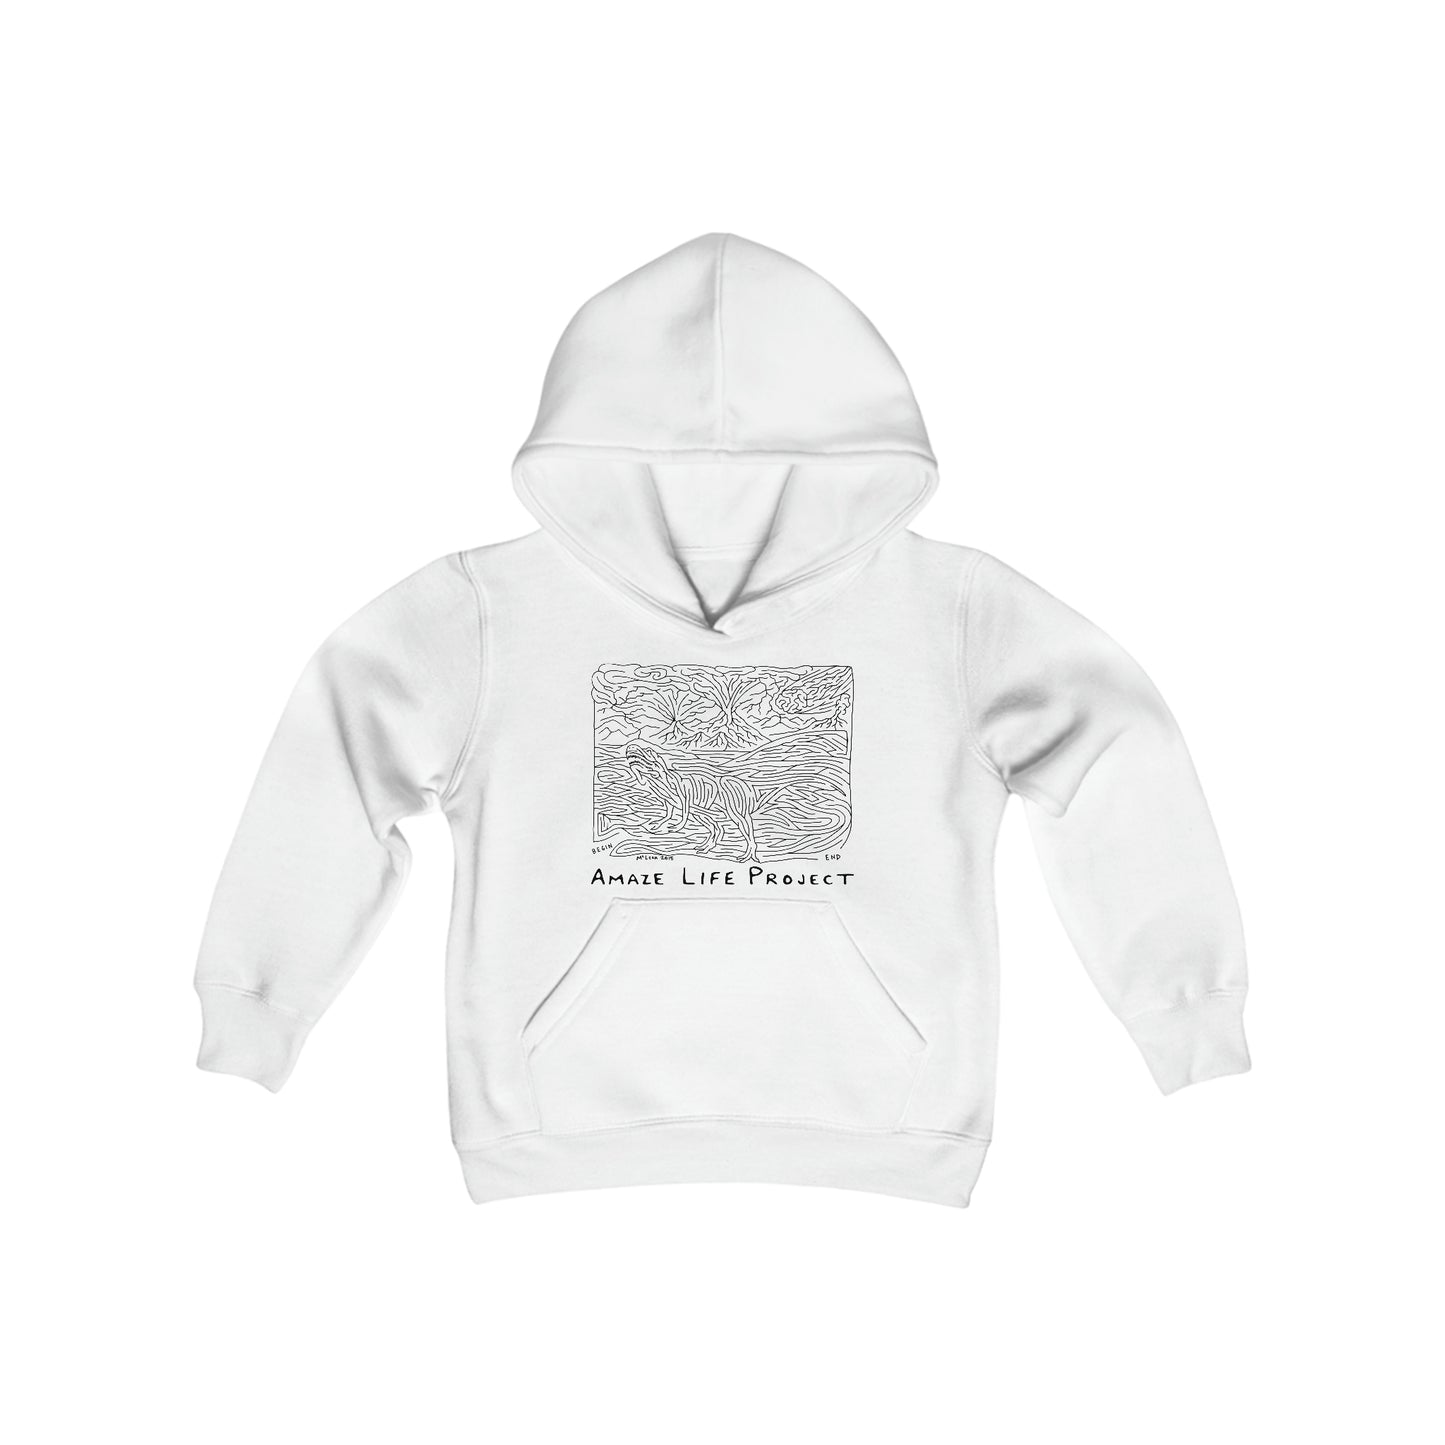 T-Rex Apocalypse Youth Hoodie